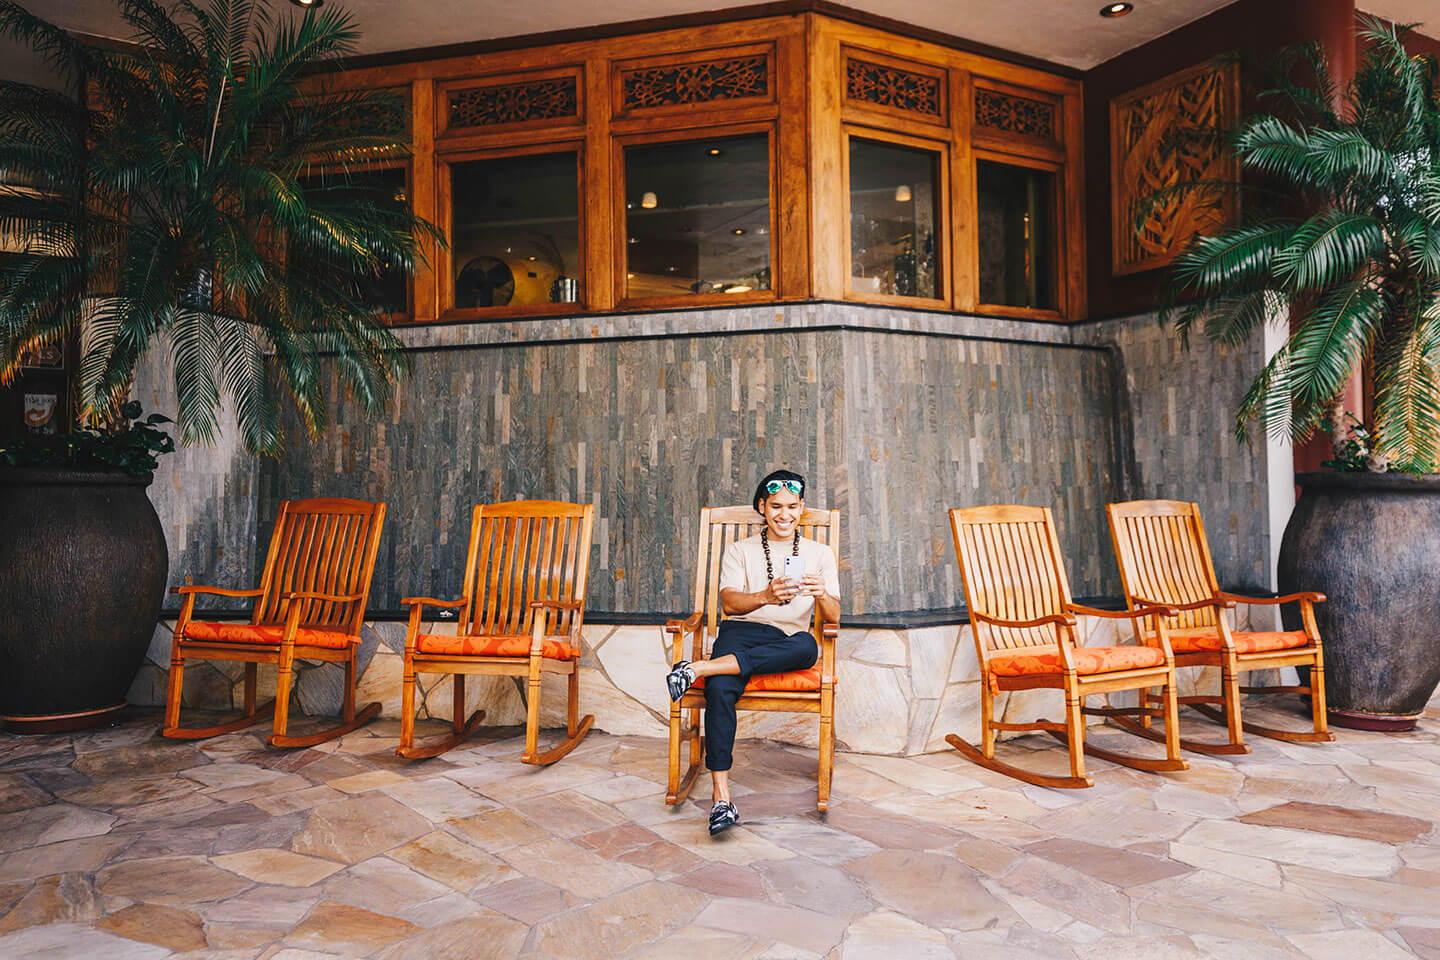 Man relaxing on rocking chair in hotel porte cochere